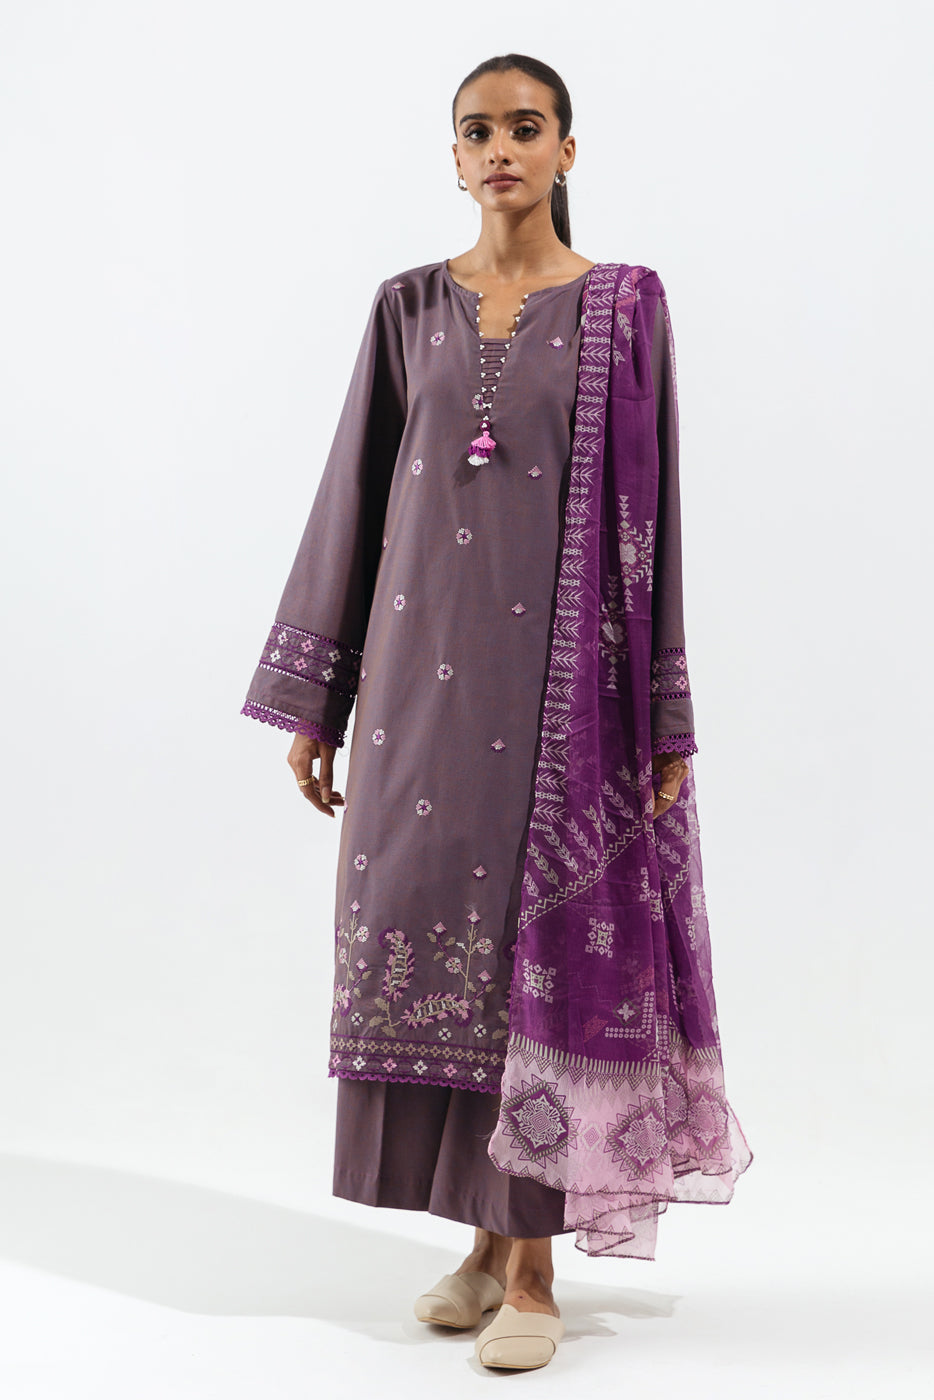 3 PIECE - EMBROIDERED TWO TONE SUIT - LAVENDER GEM